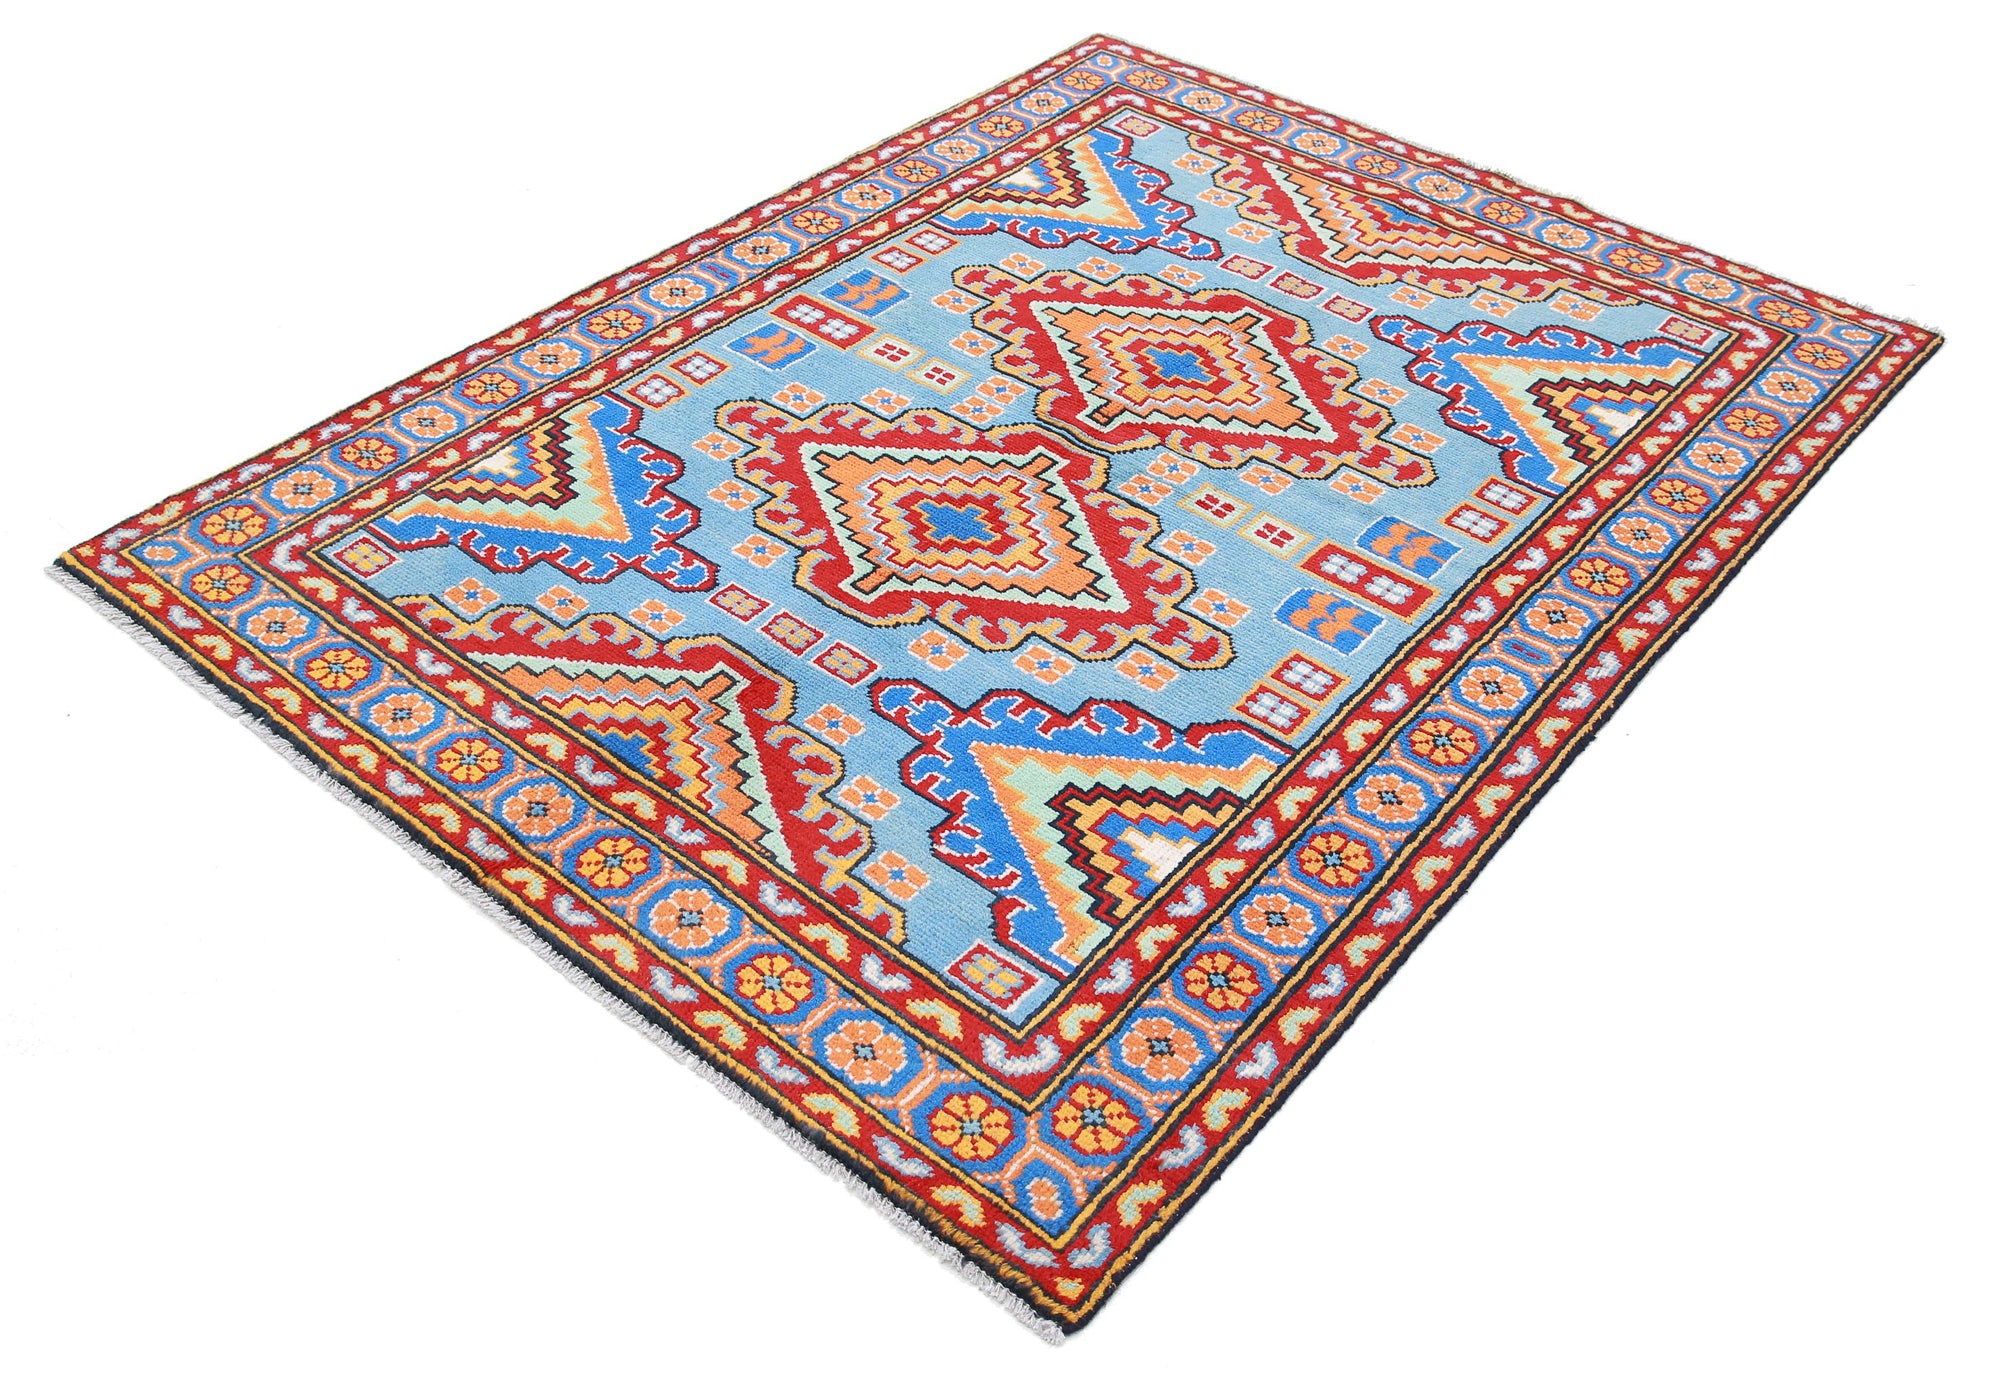 Revival-hand-knotted-qarghani-wool-rug-5014216-2.jpg